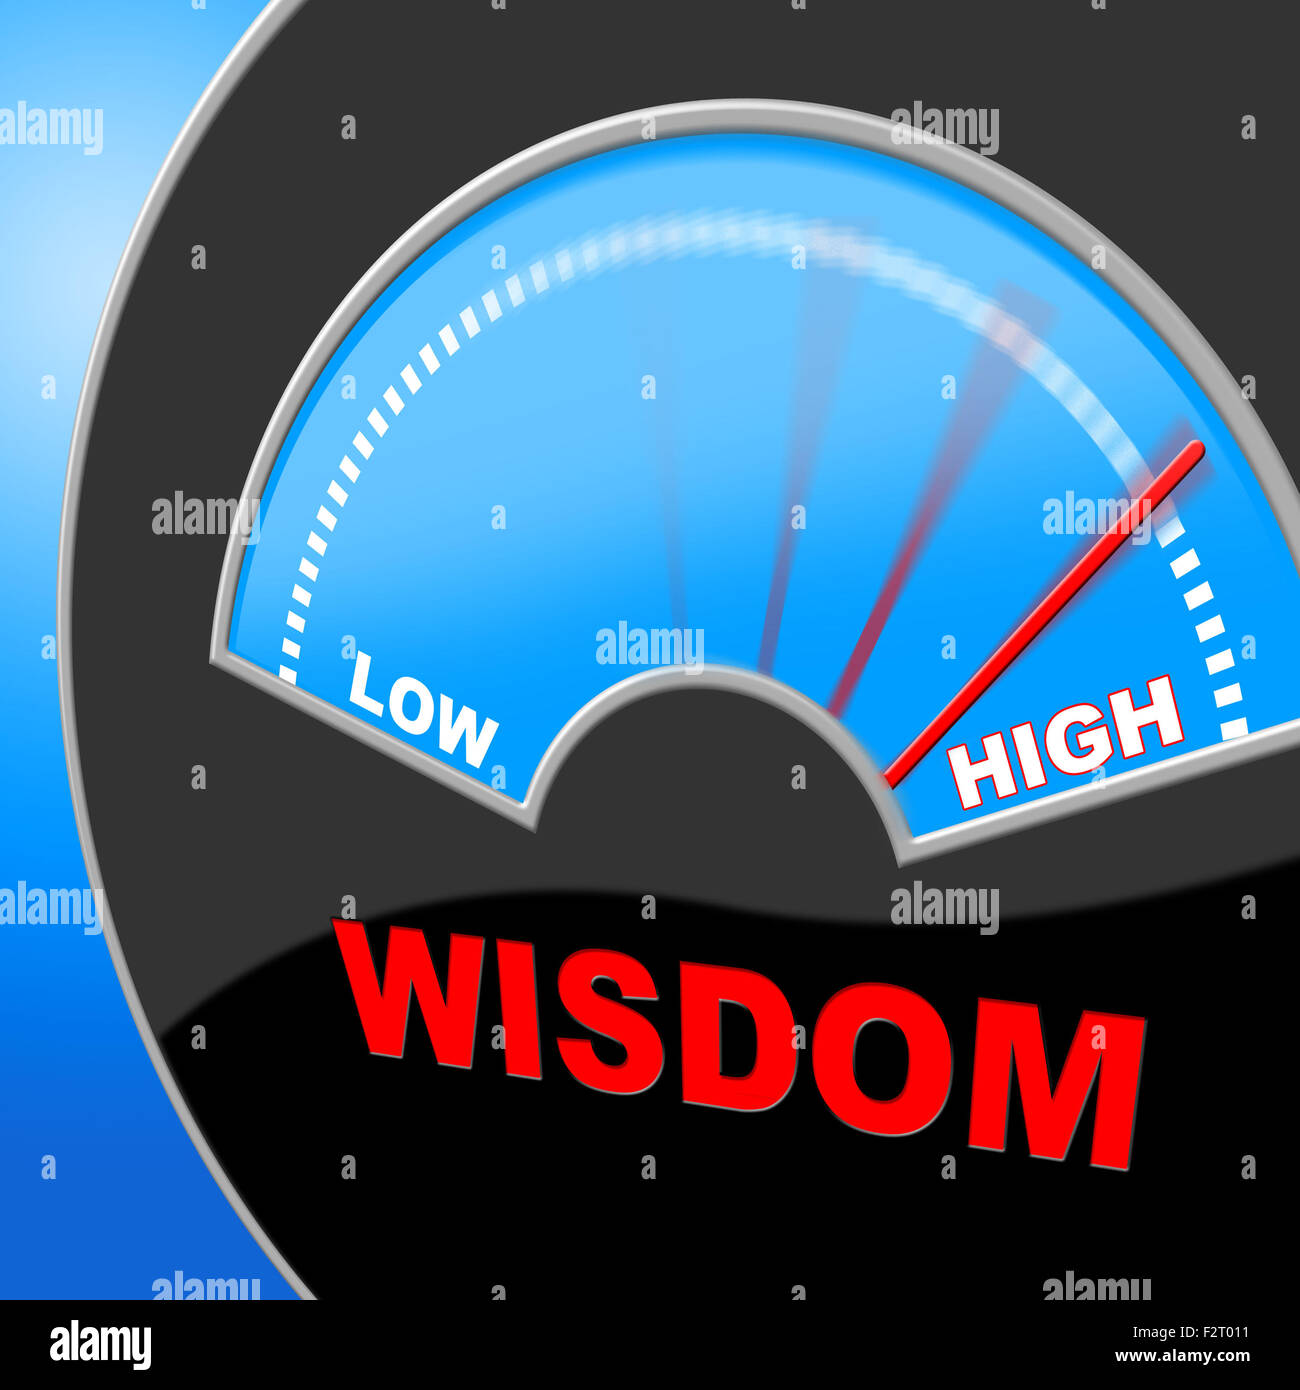 Wisdom High Showing Wise Intellect And Proficiency Stock Photo